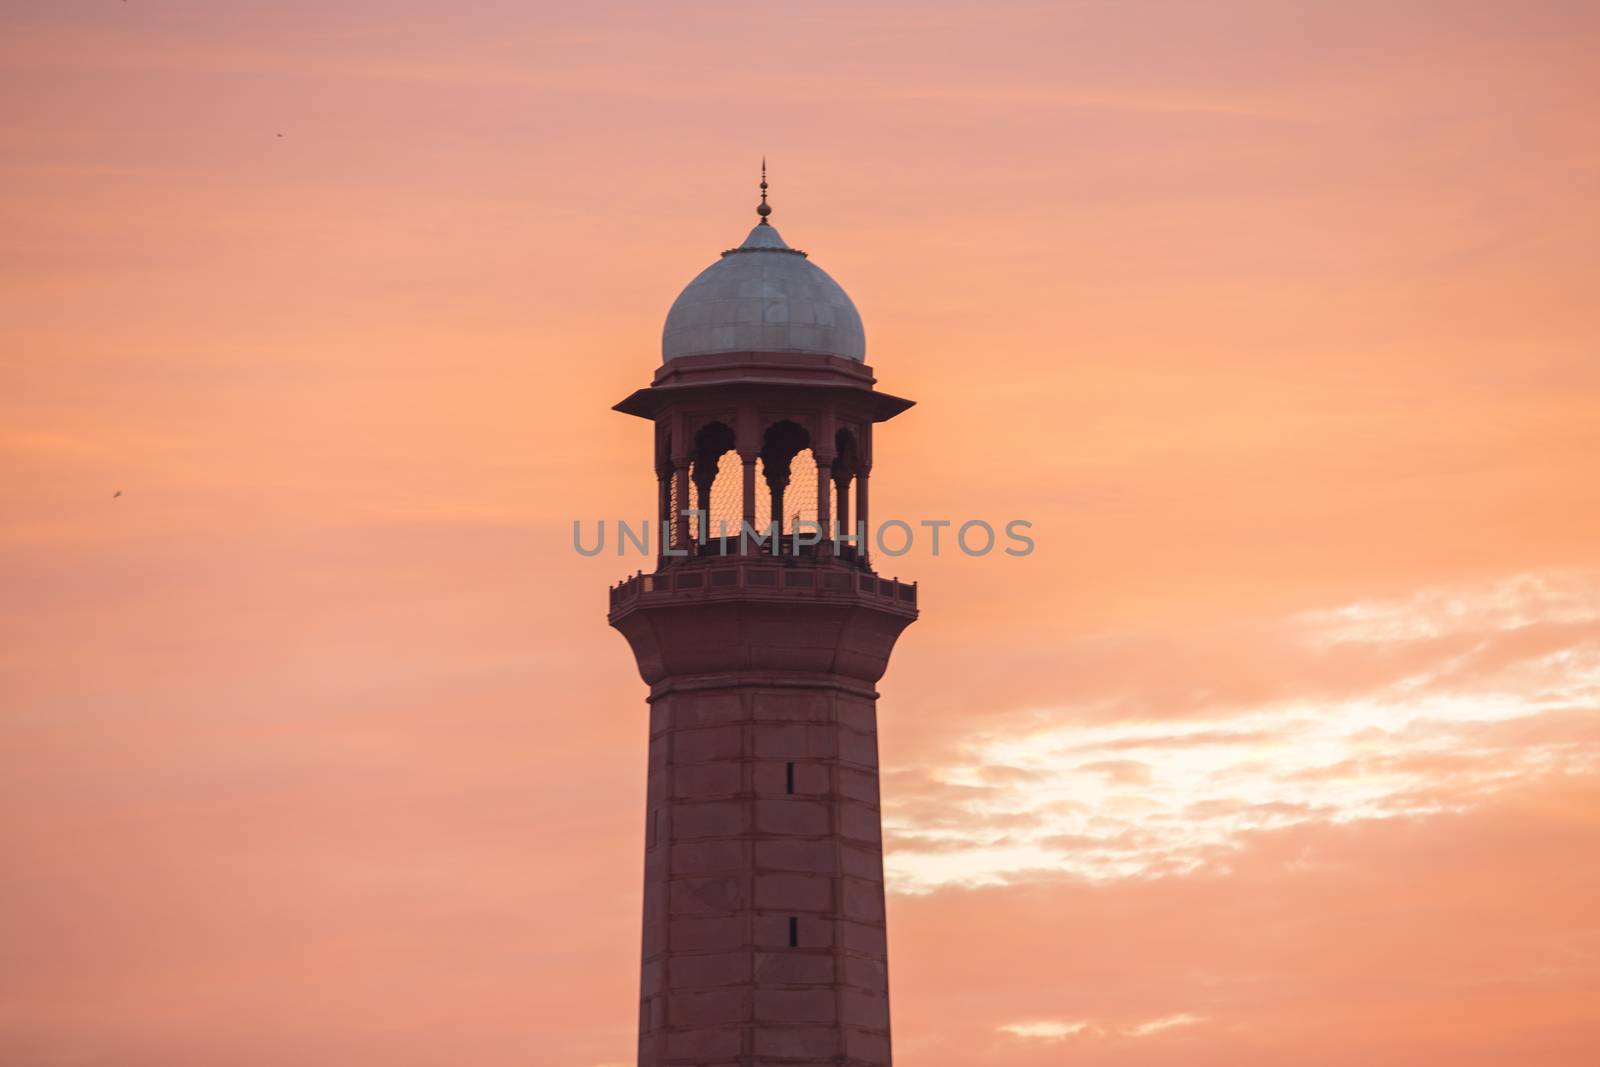 Minaret tower of a mosque calling for prayers in fiery sunset sk by haiderazim